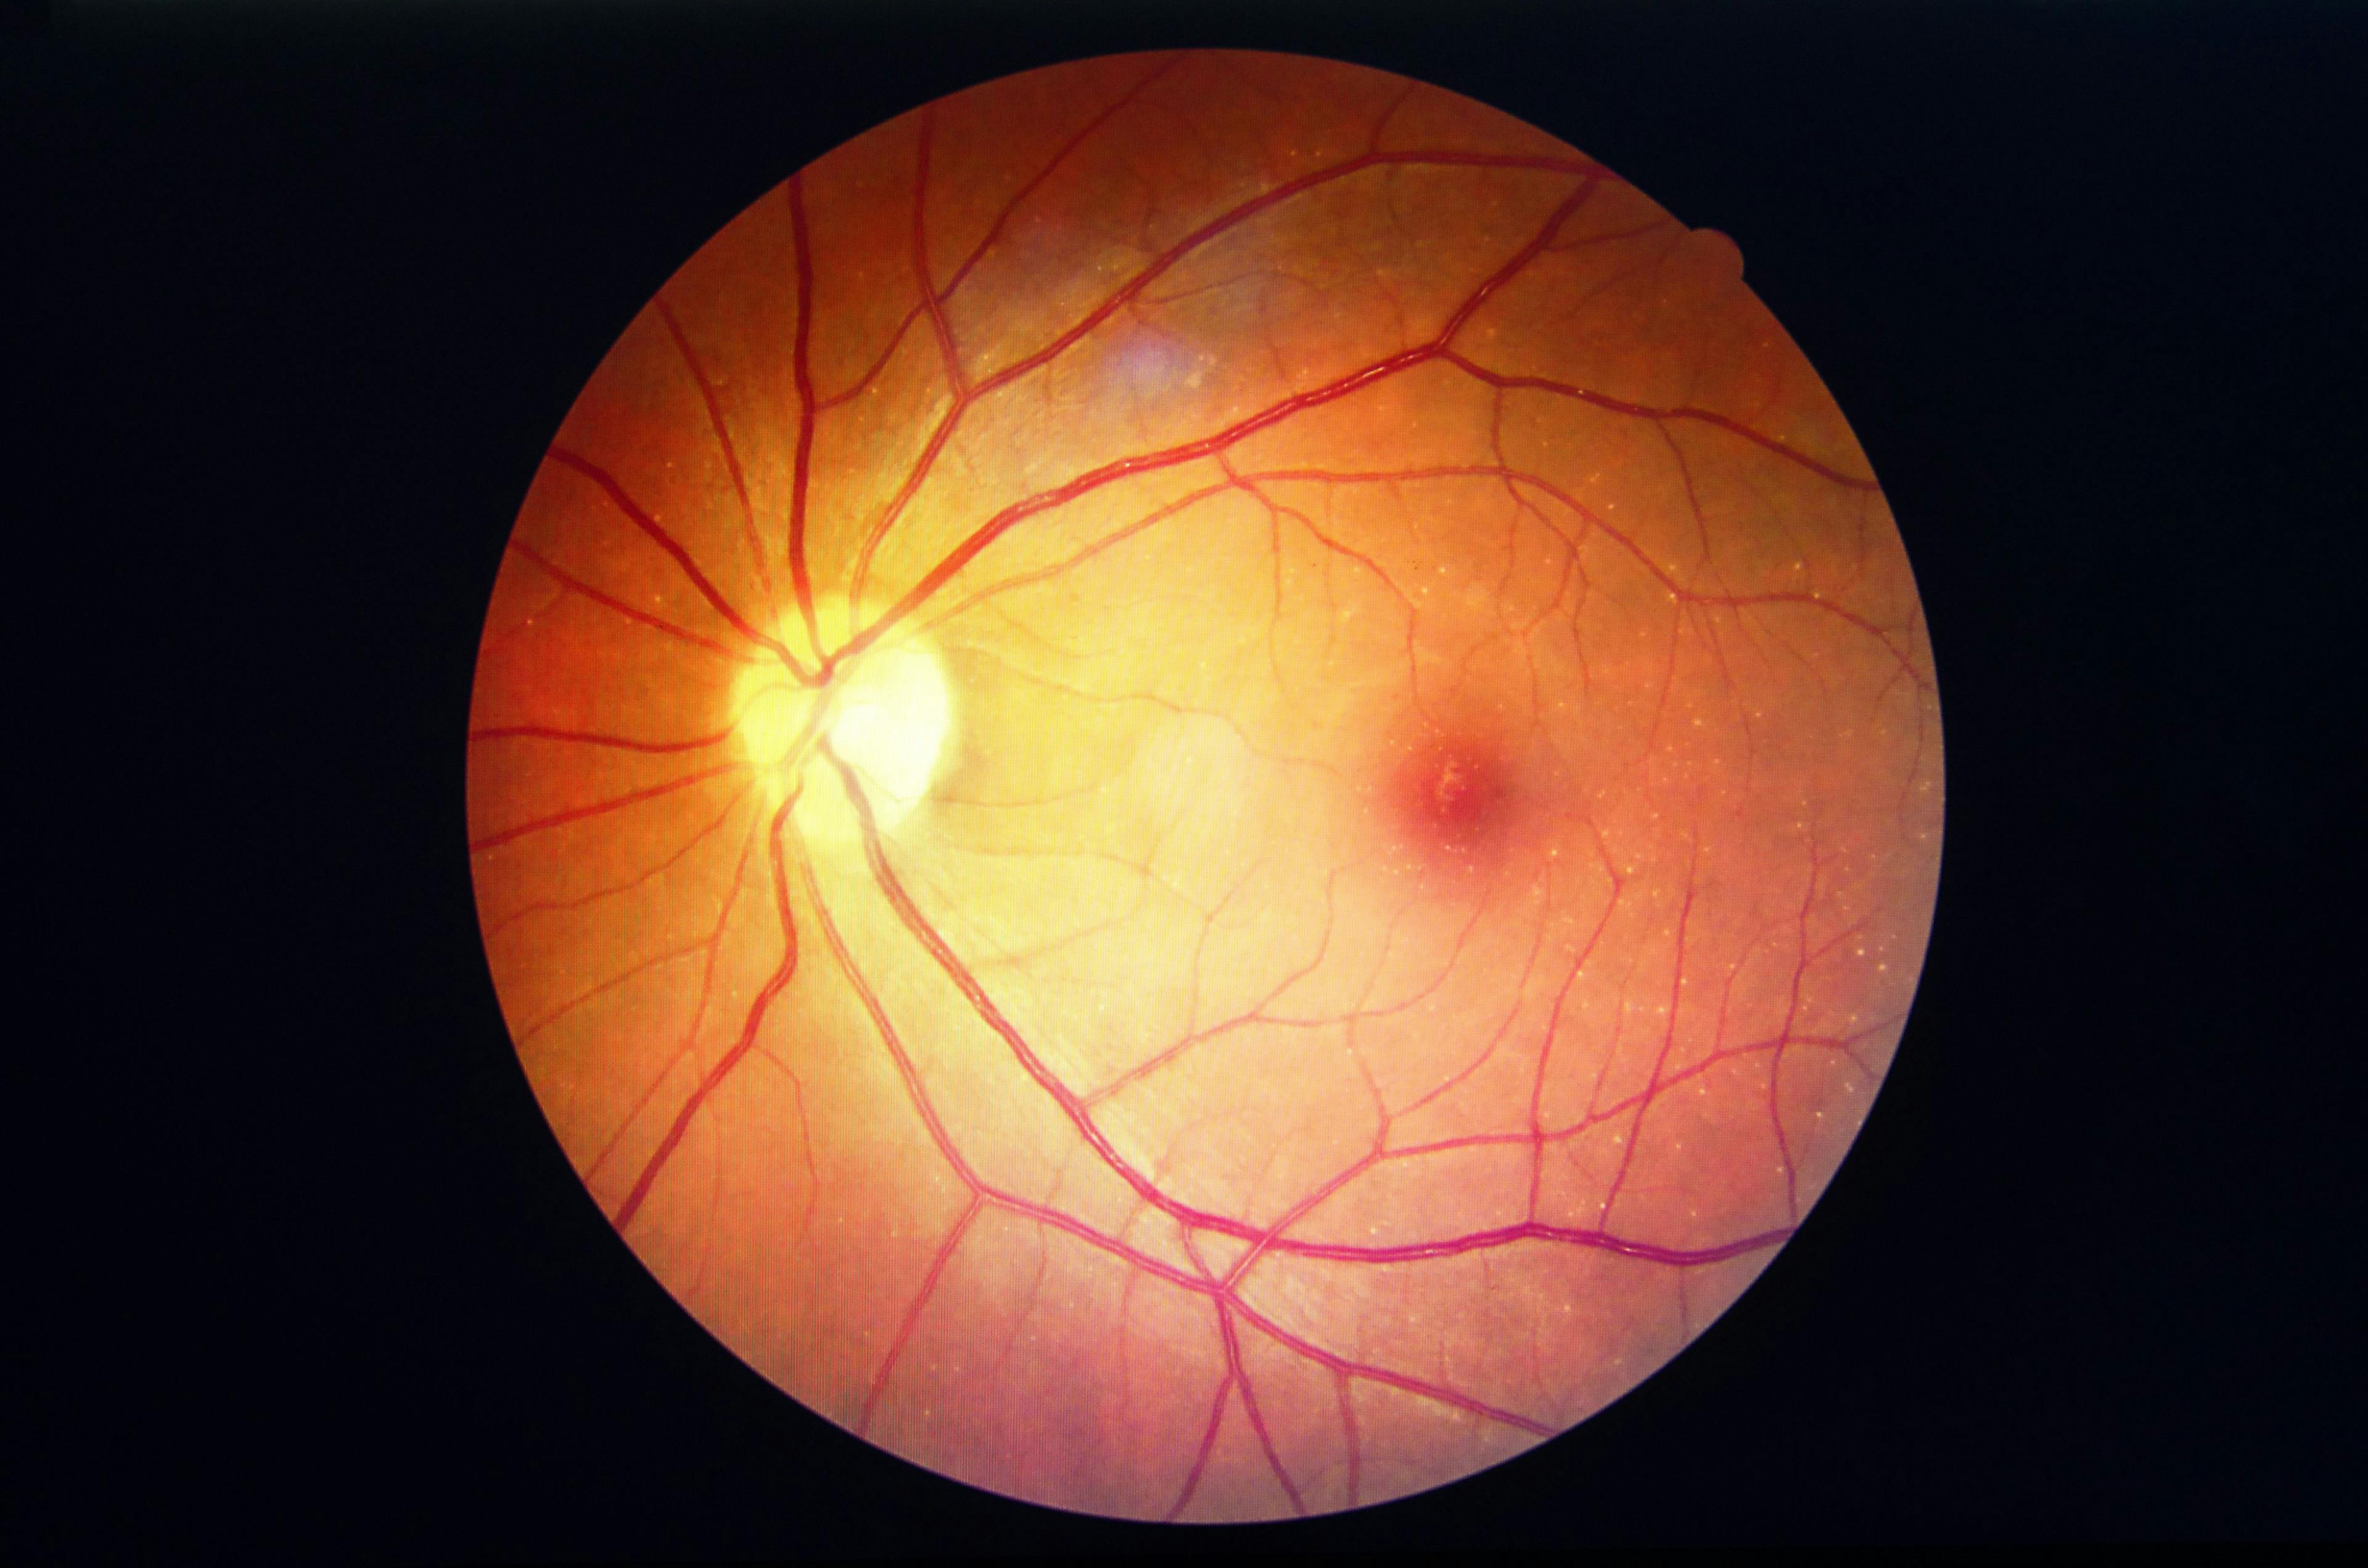 A Blood Test May Help Identify Those at Risk for Diabetic Retinopathy